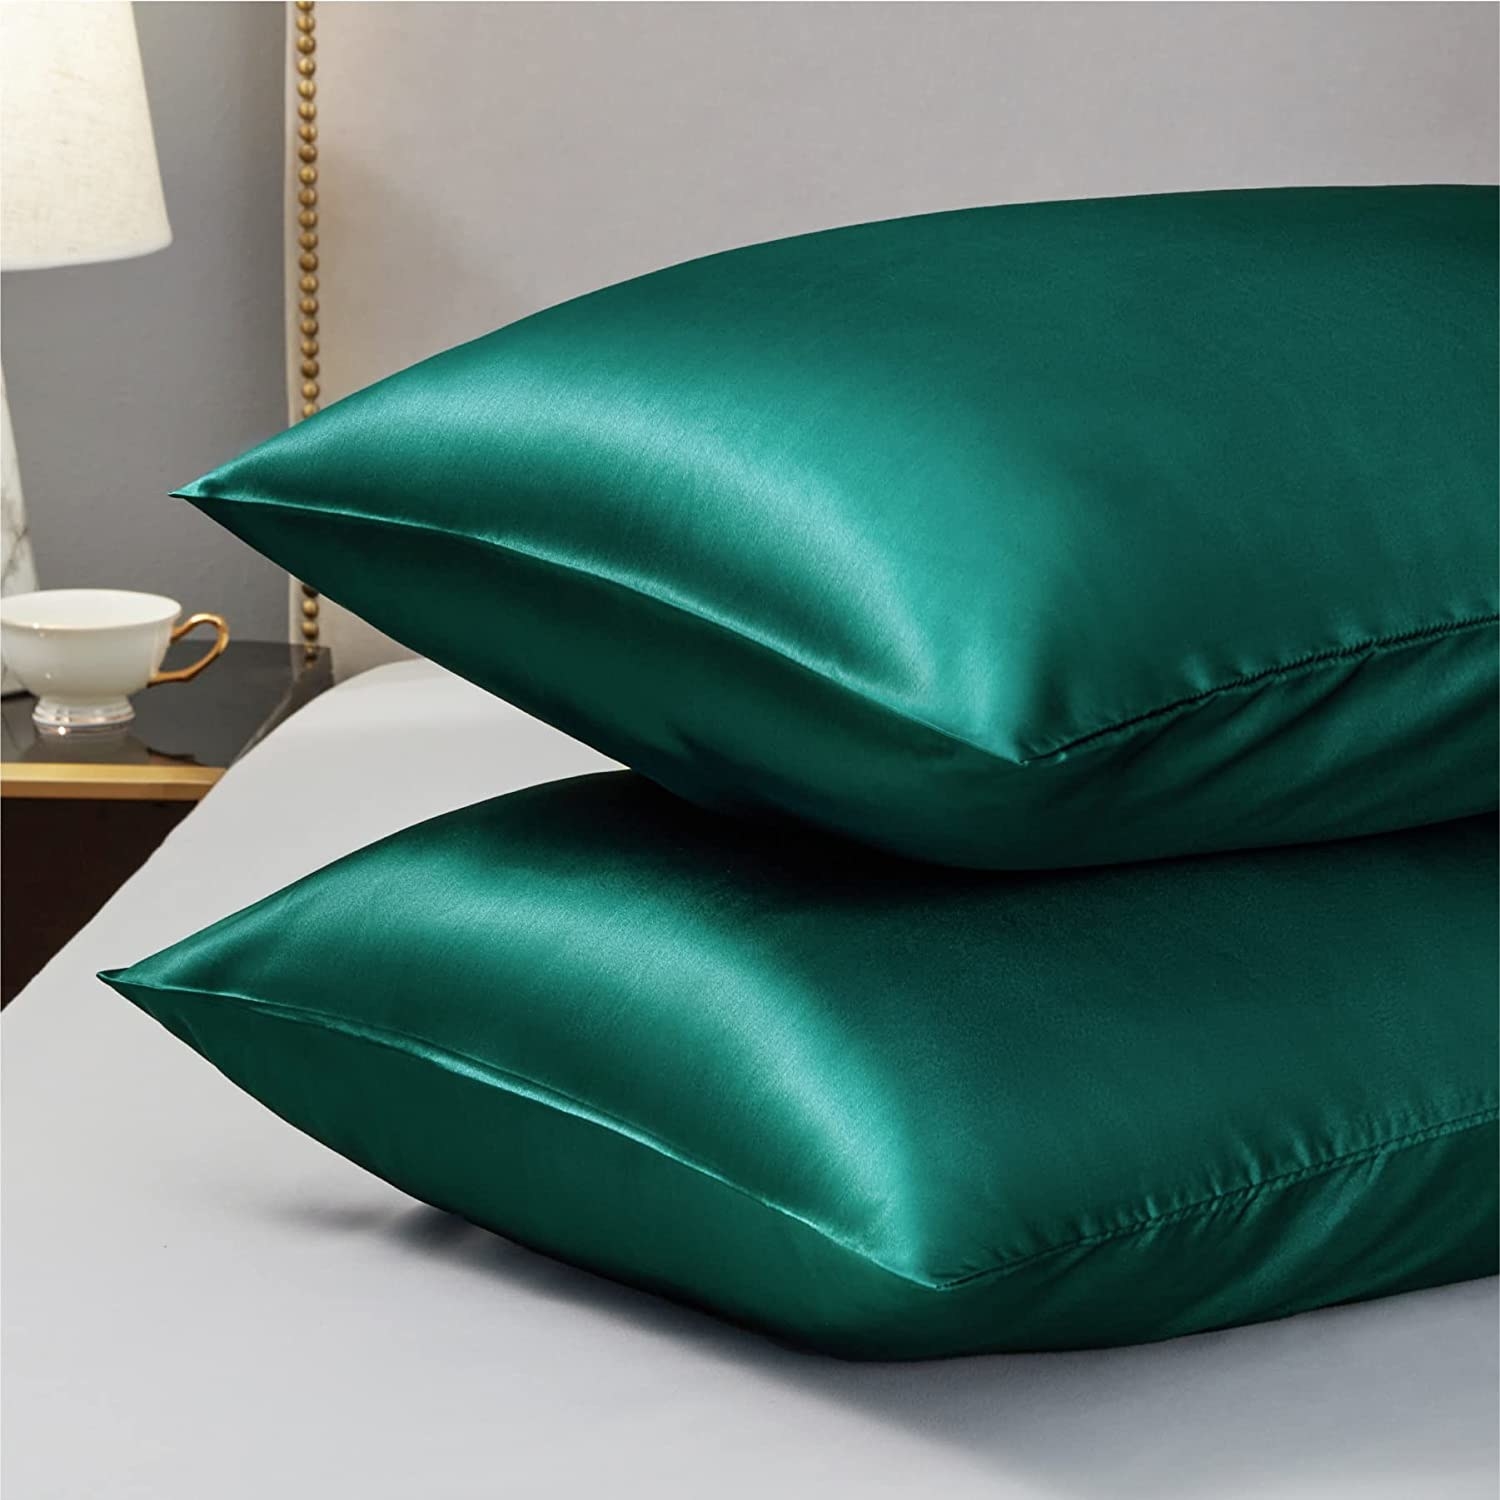 The green pillows are shown on a bed